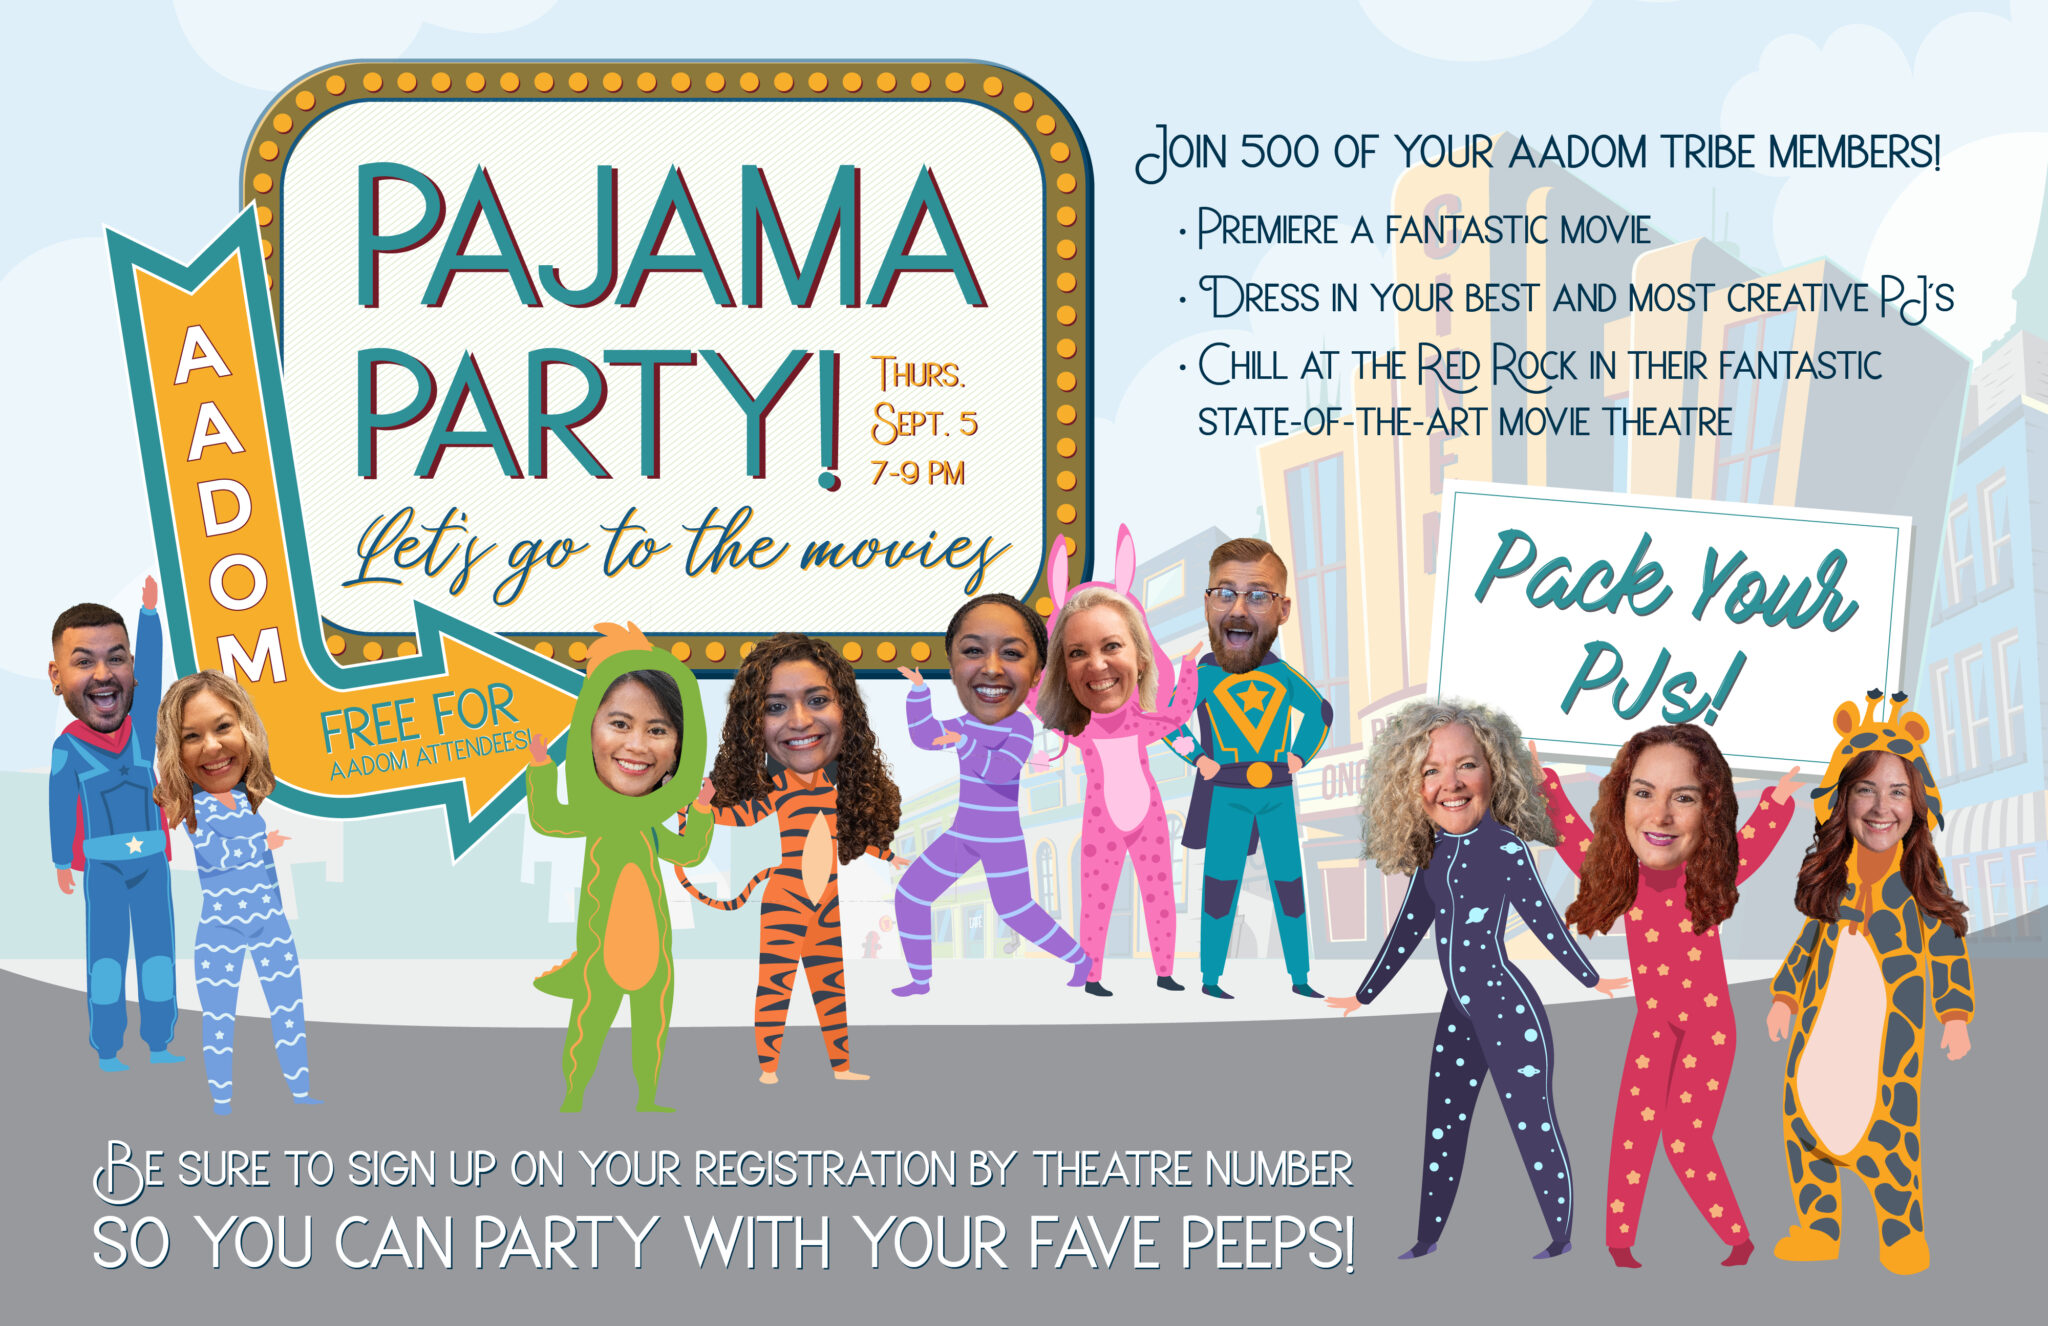 Pajama Party Website Ad Free for Attendees added 1.2.24- Final - AADOM